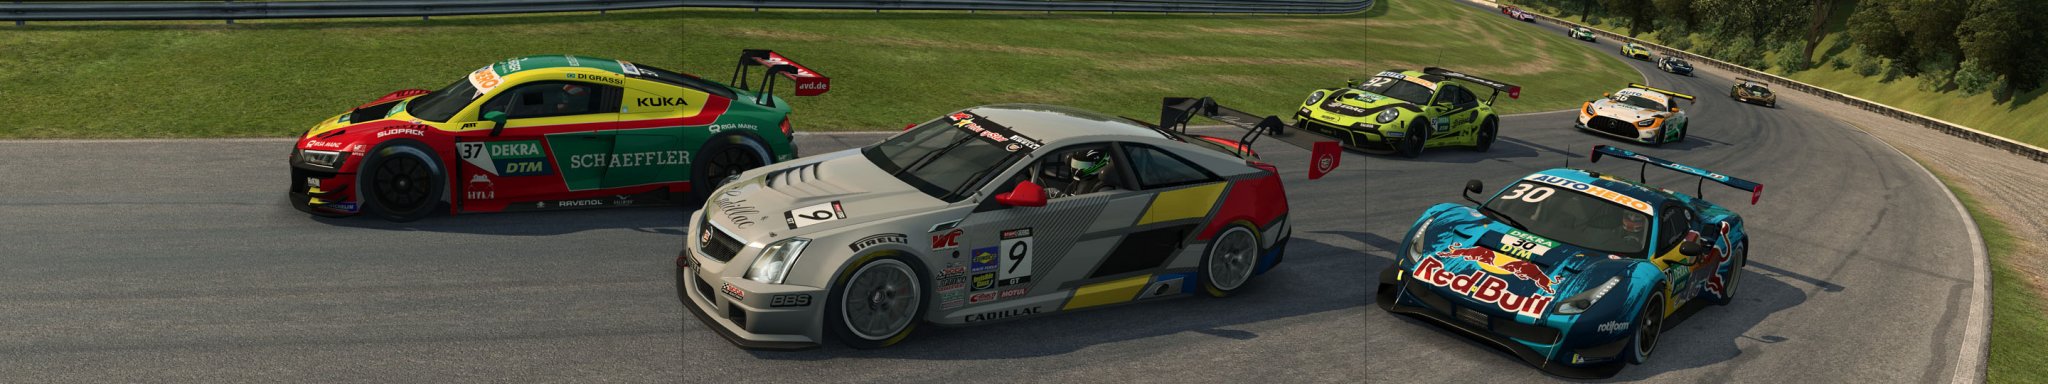 0 RACEROOM CADILLAC GT2 with P2 and 2021 DTM copy.jpg